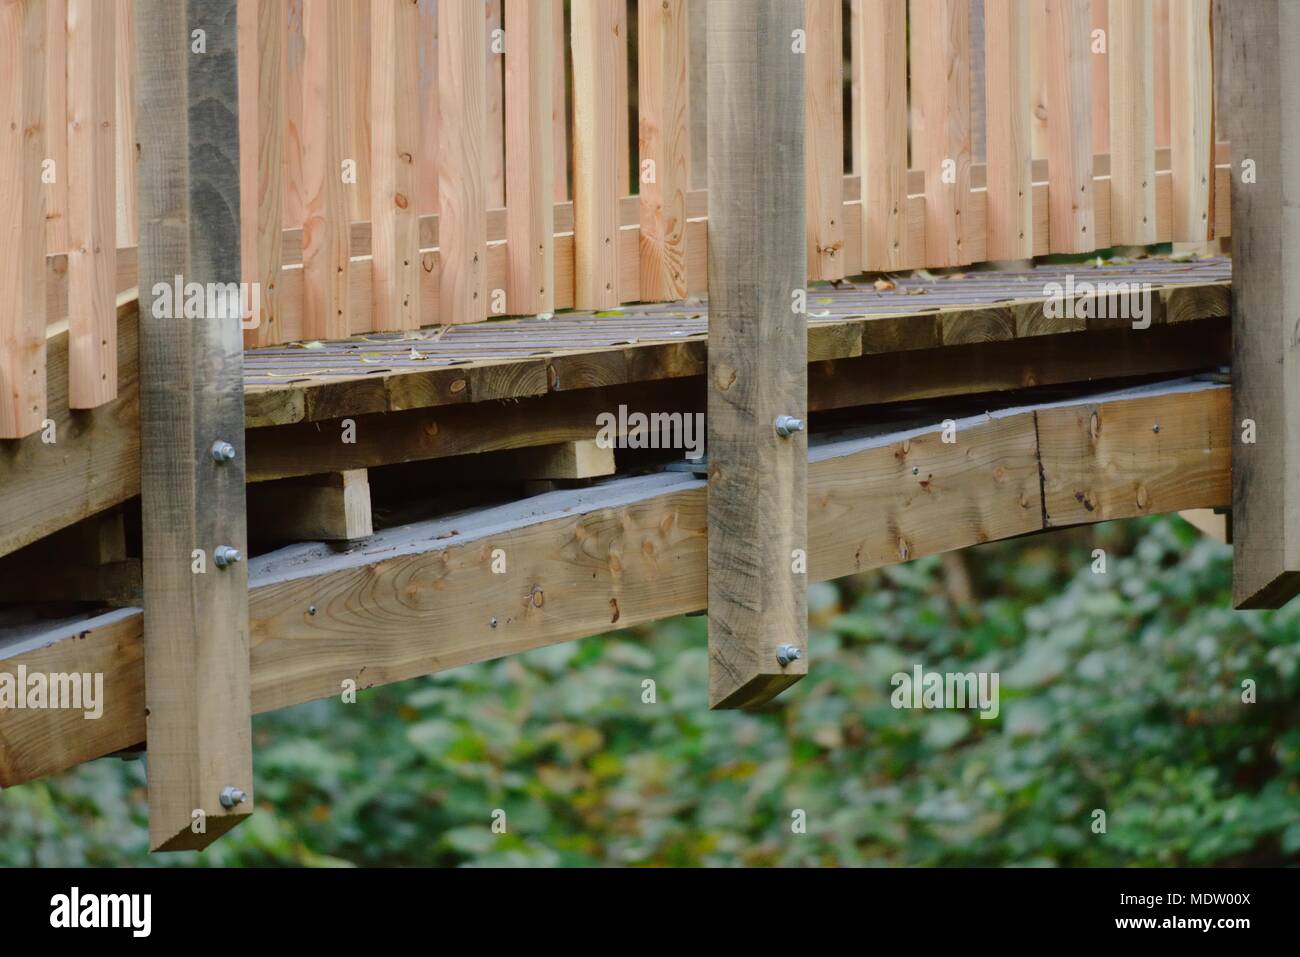 26 in a series of 32, building a timber footbridge, side view detail, deck supports. Stock Photo